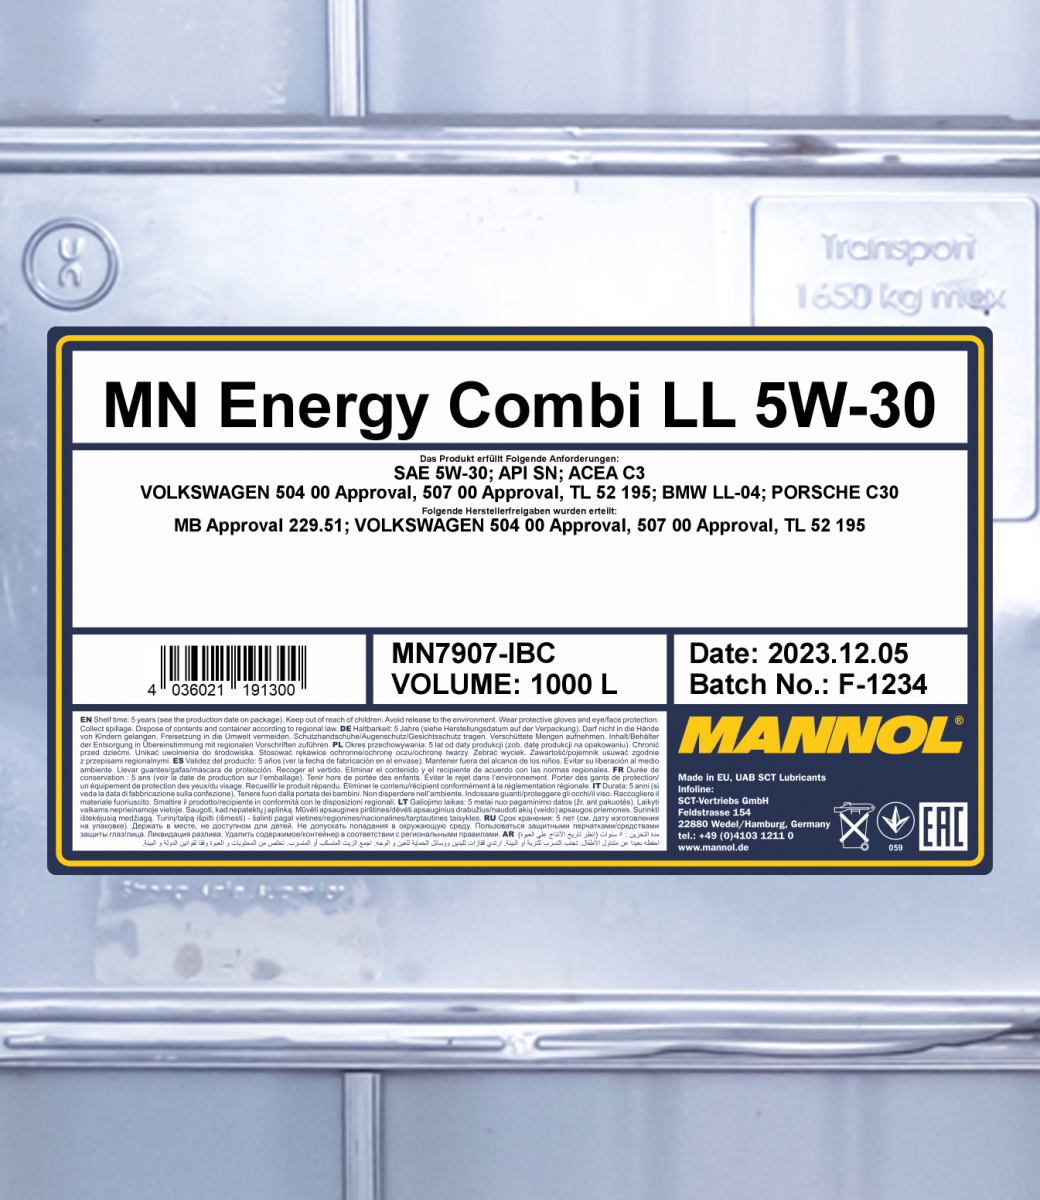 MANNOL 7907 Energy Combi LL SAE 5W-30 VW 504 00/507 00 Bi-Synthetic (PAO +  esters) Motor Oil for Petrol and Diesel Engines Oil Change Intervals Long